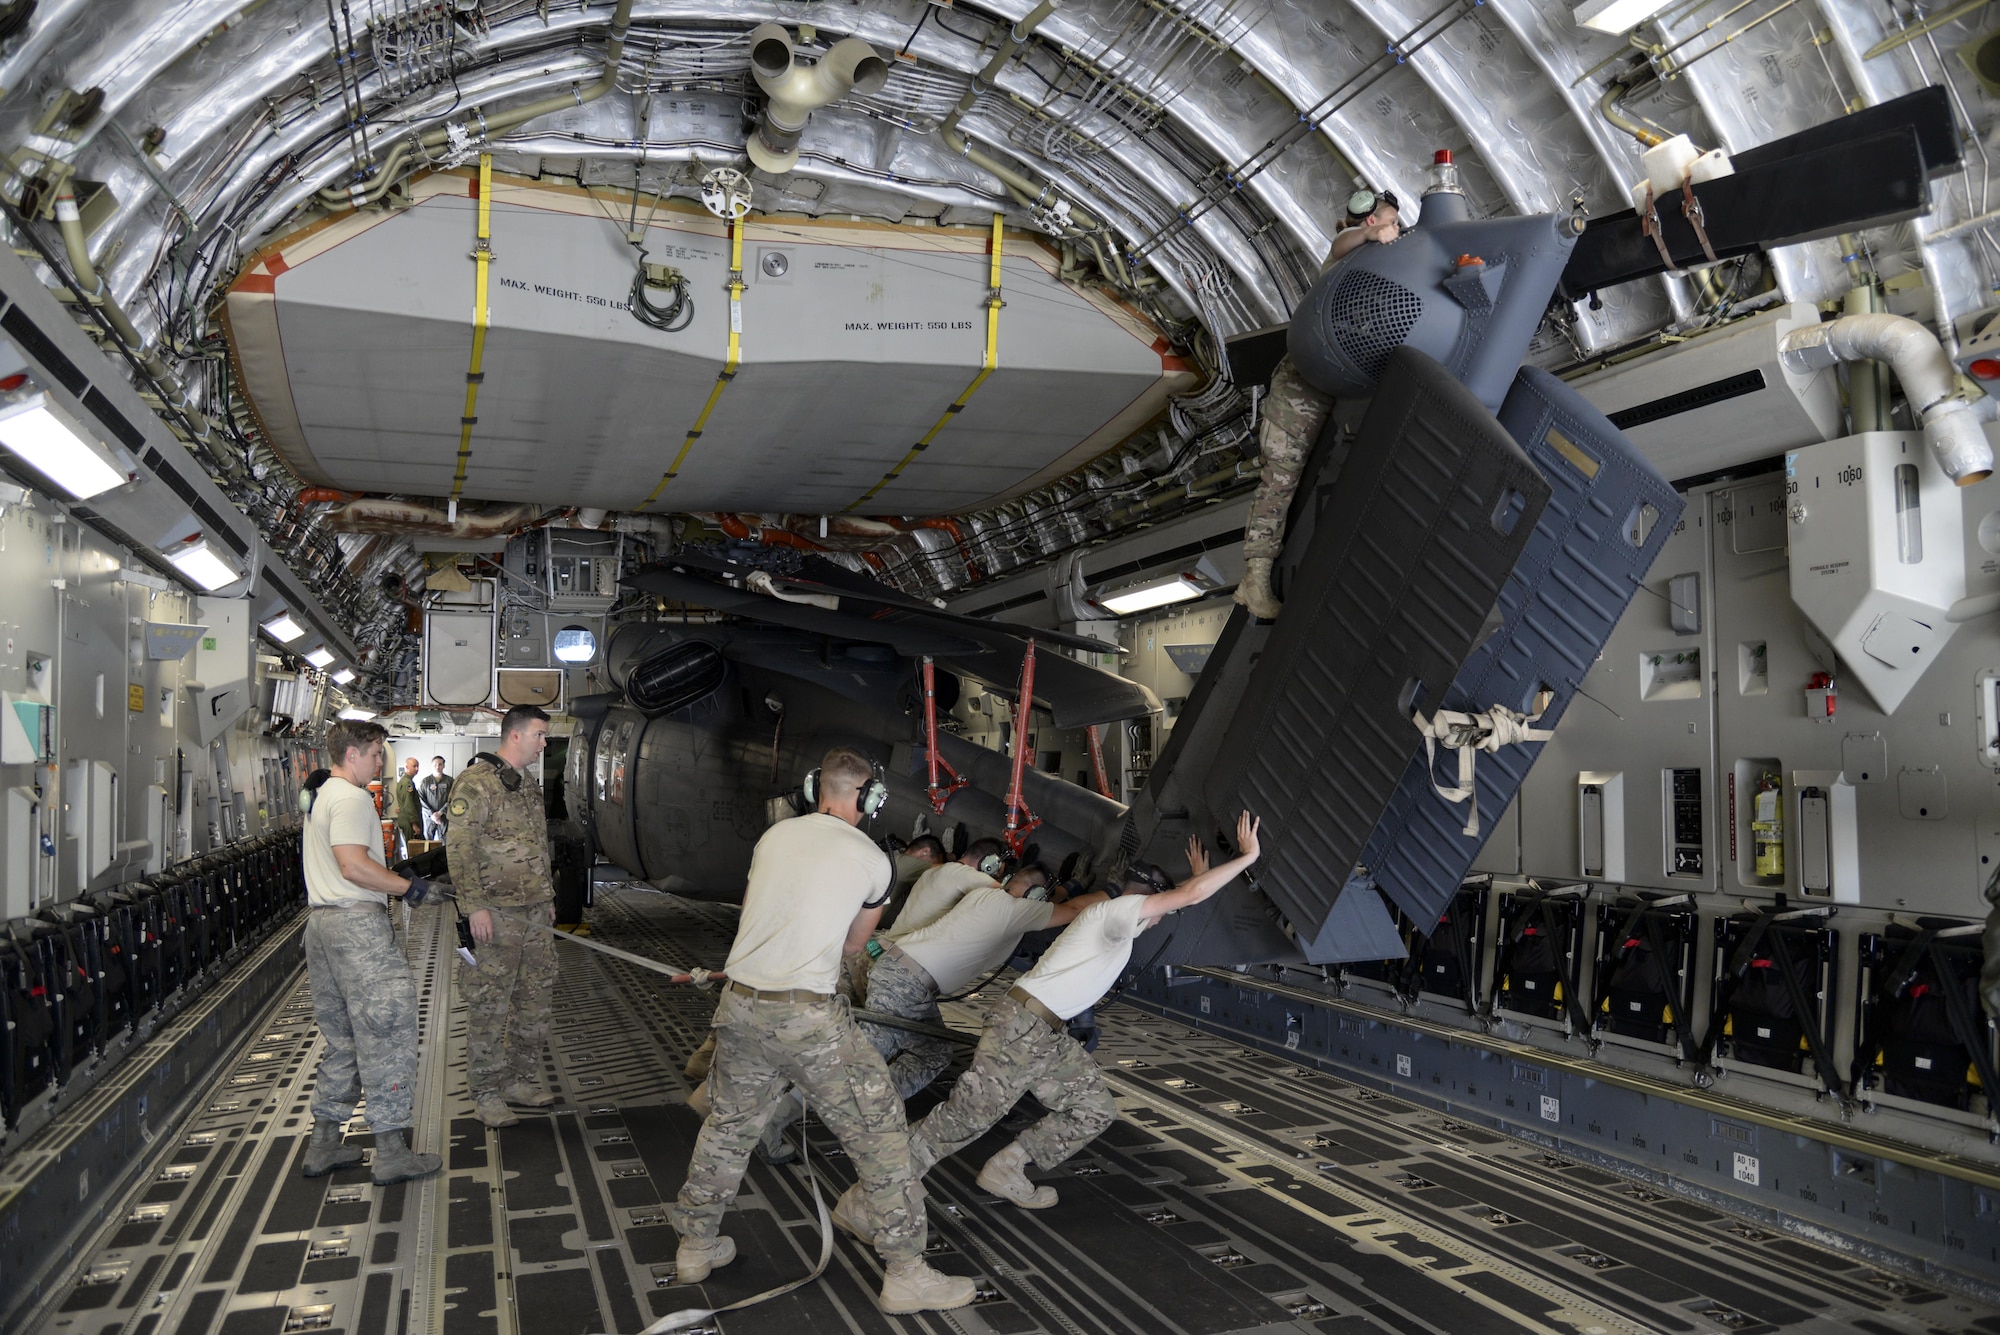 Members of the 723d Aircraft Maintenance Squadron, 41st Helicopter Maintenance Unit assigned to Moody Air Force Base, Ga., position an HH-60G Pave Hawk search and rescue helicopter May 15, 2017, on a 3d Airlift Squadron C-17 Globemaster III at Moody AFB. The maintainers loaded two HH-60 aircraft, which were flown to Langley Air Force Base, Va., for Exercise Rapid Rescue on May 17. (U.S. Air Force Photo by Senior Airman Aaron J. Jenne)